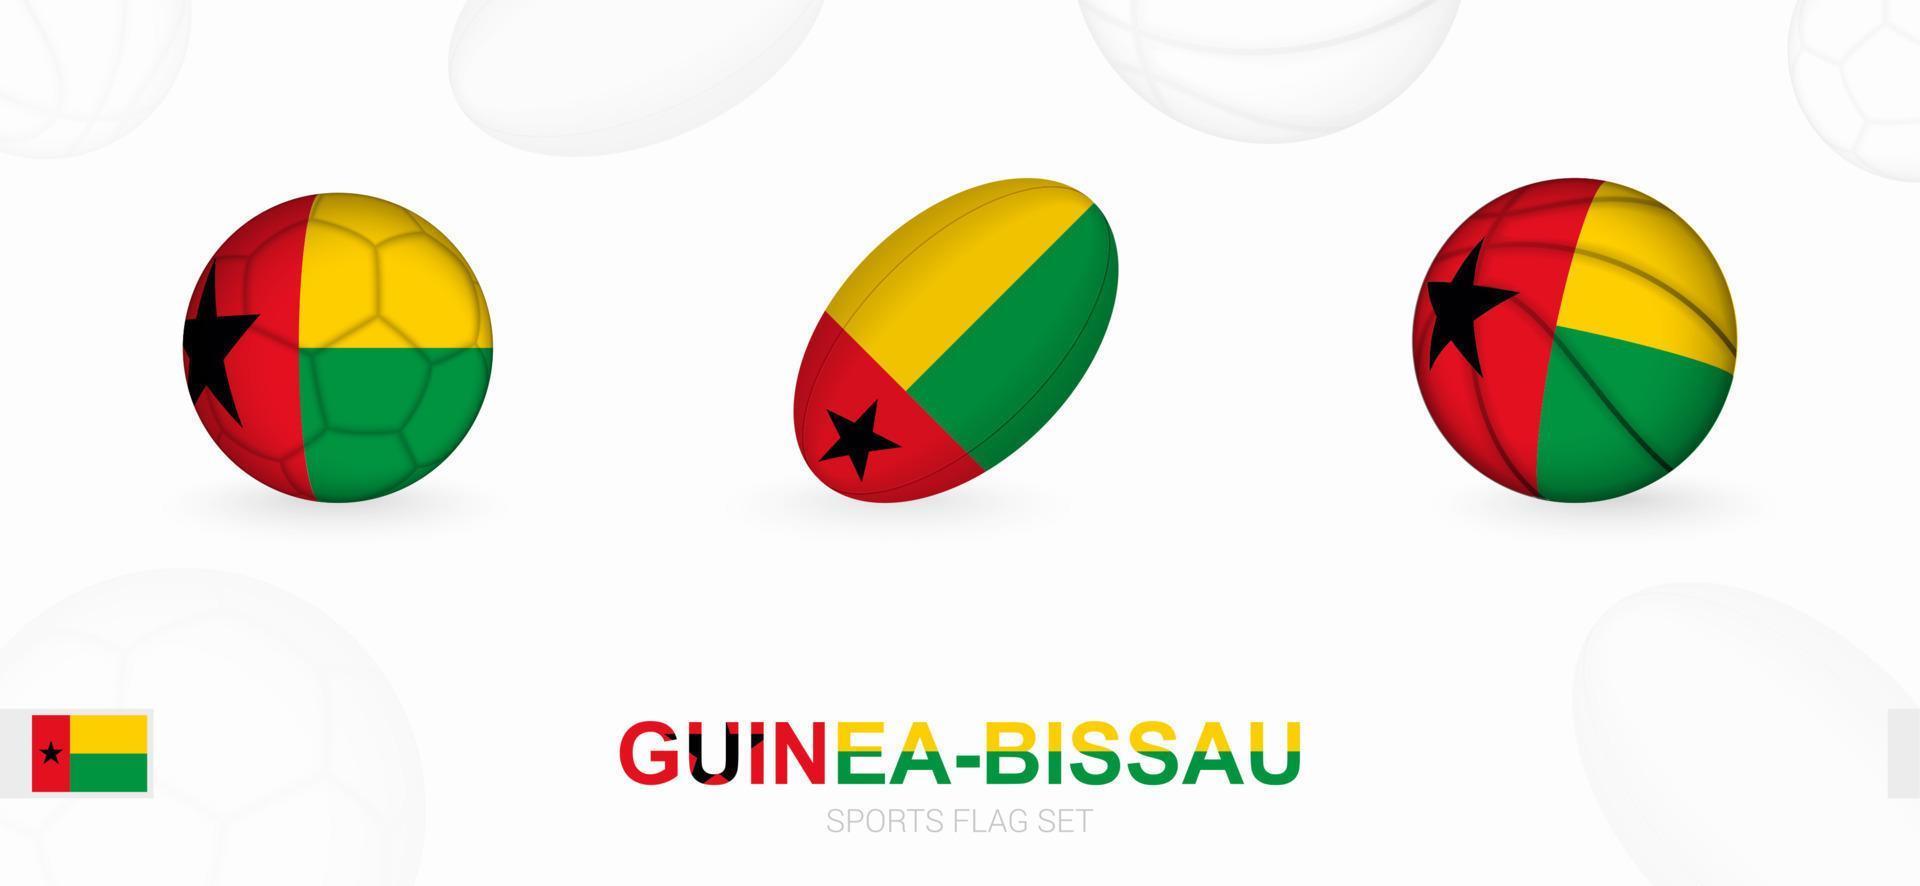 Sports icons for football, rugby and basketball with the flag of Guinea-Bissau. vector